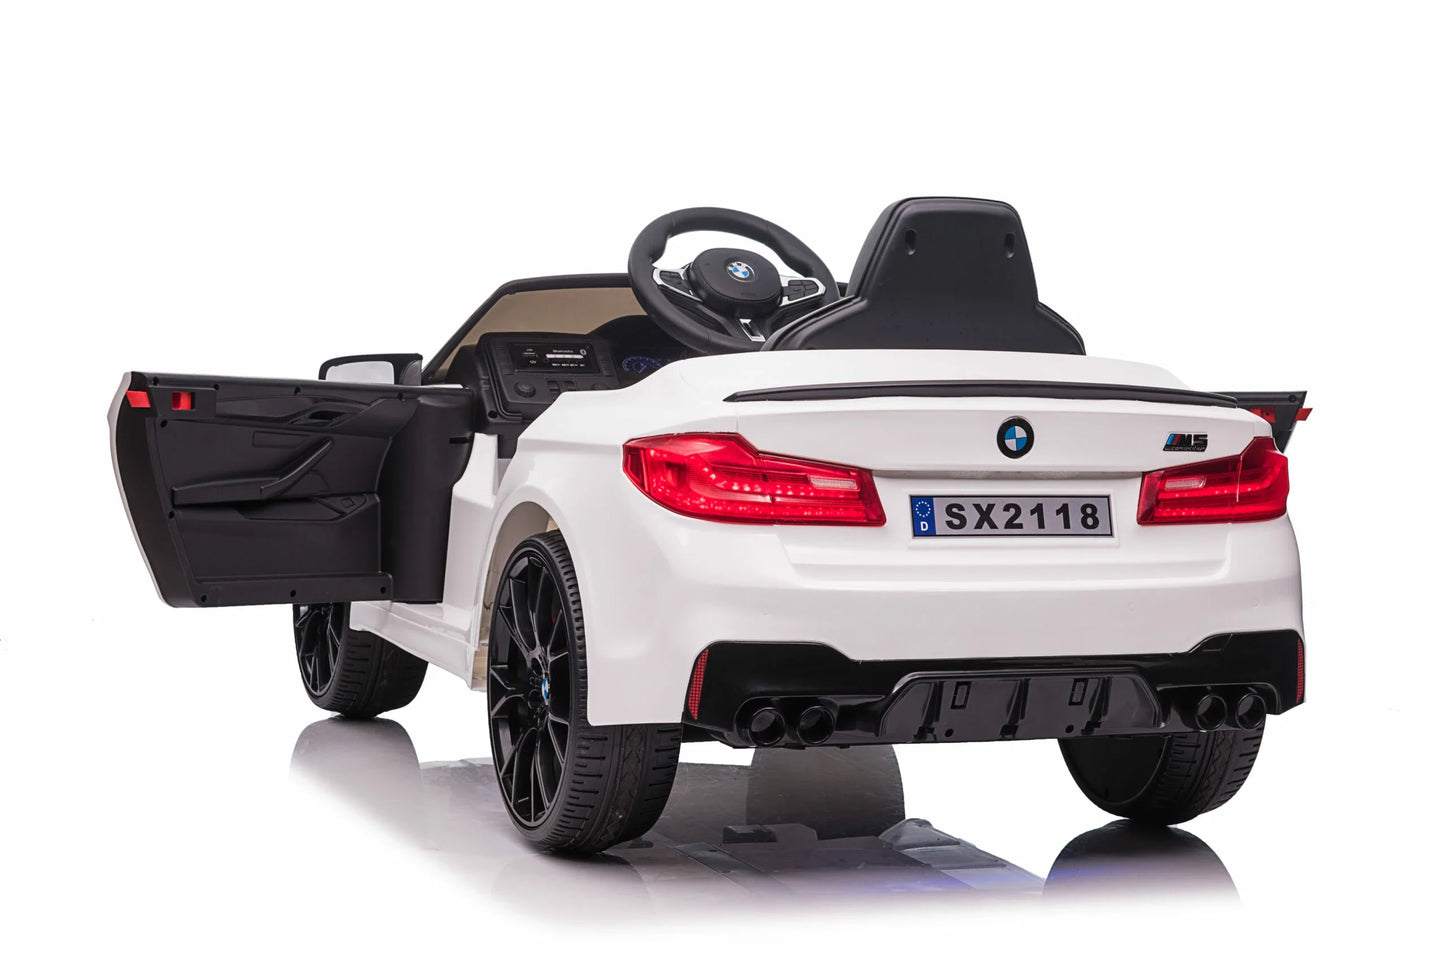 White BMW M5 Drift kids ride-on car, 24-volt electric vehicle with an open trunk, set against a white background.